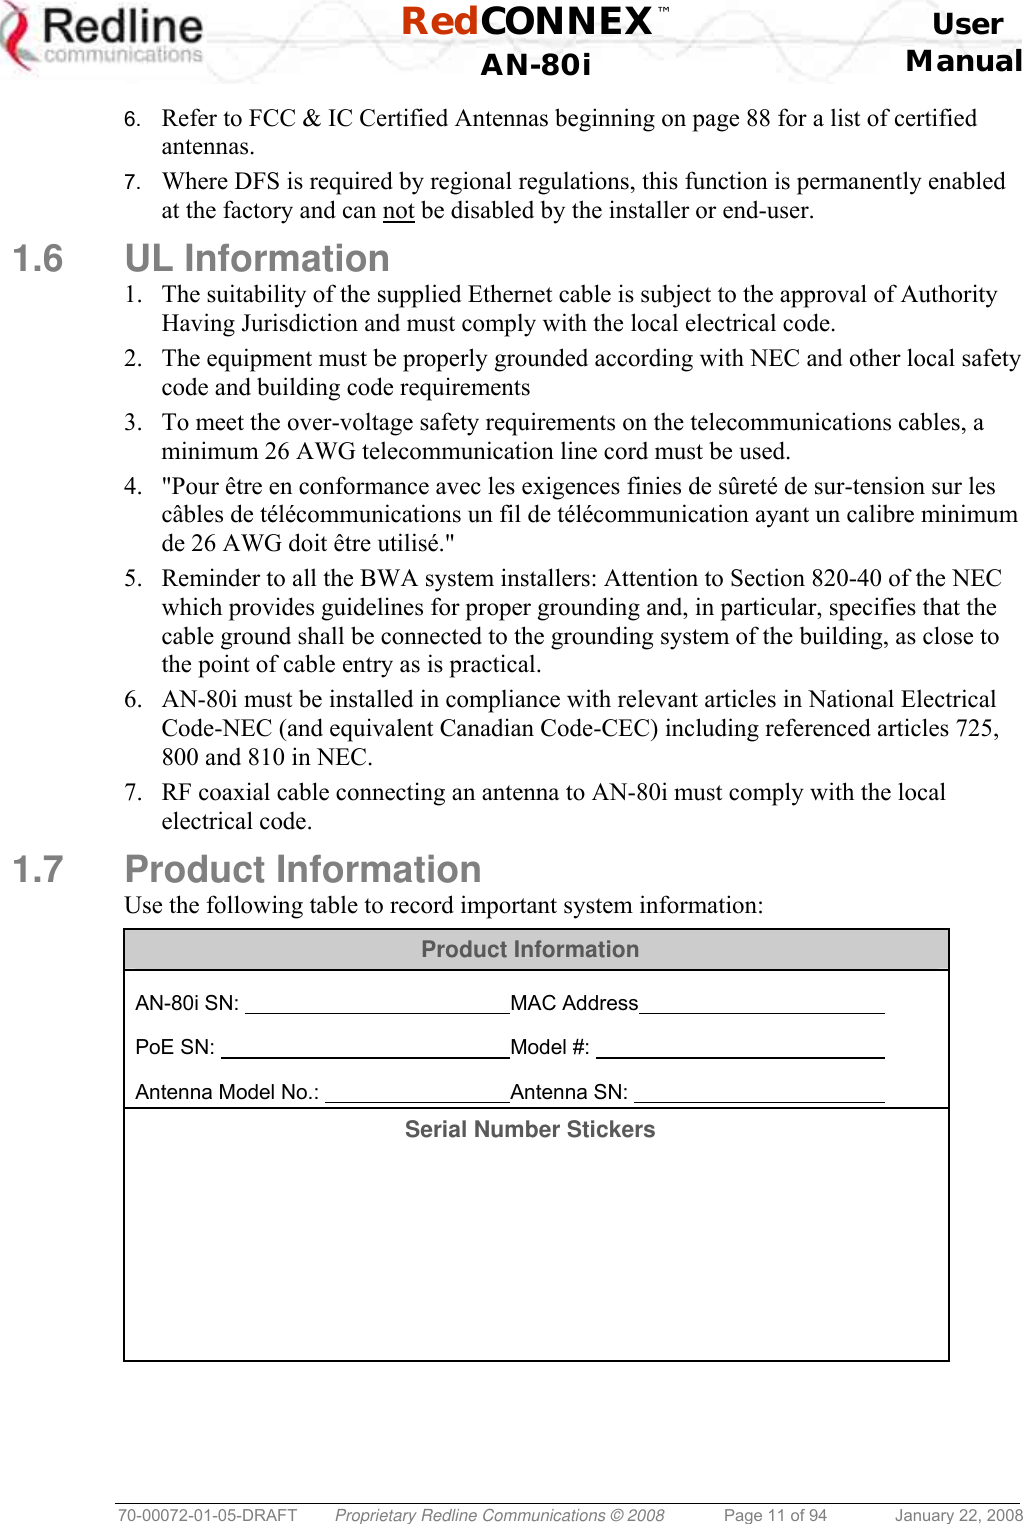  RedCONNEX™    User  AN-80i Manual  70-00072-01-05-DRAFT  Proprietary Redline Communications © 2008  Page 11 of 94  January 22, 2008 6.  Refer to FCC &amp; IC Certified Antennas beginning on page 88 for a list of certified antennas. 7.  Where DFS is required by regional regulations, this function is permanently enabled at the factory and can not be disabled by the installer or end-user. 1.6 UL Information 1.  The suitability of the supplied Ethernet cable is subject to the approval of Authority Having Jurisdiction and must comply with the local electrical code. 2.  The equipment must be properly grounded according with NEC and other local safety code and building code requirements 3.  To meet the over-voltage safety requirements on the telecommunications cables, a minimum 26 AWG telecommunication line cord must be used. 4.  &quot;Pour être en conformance avec les exigences finies de sûreté de sur-tension sur les câbles de télécommunications un fil de télécommunication ayant un calibre minimum de 26 AWG doit être utilisé.&quot; 5.  Reminder to all the BWA system installers: Attention to Section 820-40 of the NEC which provides guidelines for proper grounding and, in particular, specifies that the cable ground shall be connected to the grounding system of the building, as close to the point of cable entry as is practical. 6.  AN-80i must be installed in compliance with relevant articles in National Electrical Code-NEC (and equivalent Canadian Code-CEC) including referenced articles 725, 800 and 810 in NEC. 7.  RF coaxial cable connecting an antenna to AN-80i must comply with the local electrical code. 1.7 Product Information Use the following table to record important system information: Product Information  AN-80i SN:         MAC Address      PoE SN:         Model #:           Antenna Model No.:       Antenna SN:      Serial Number Stickers         